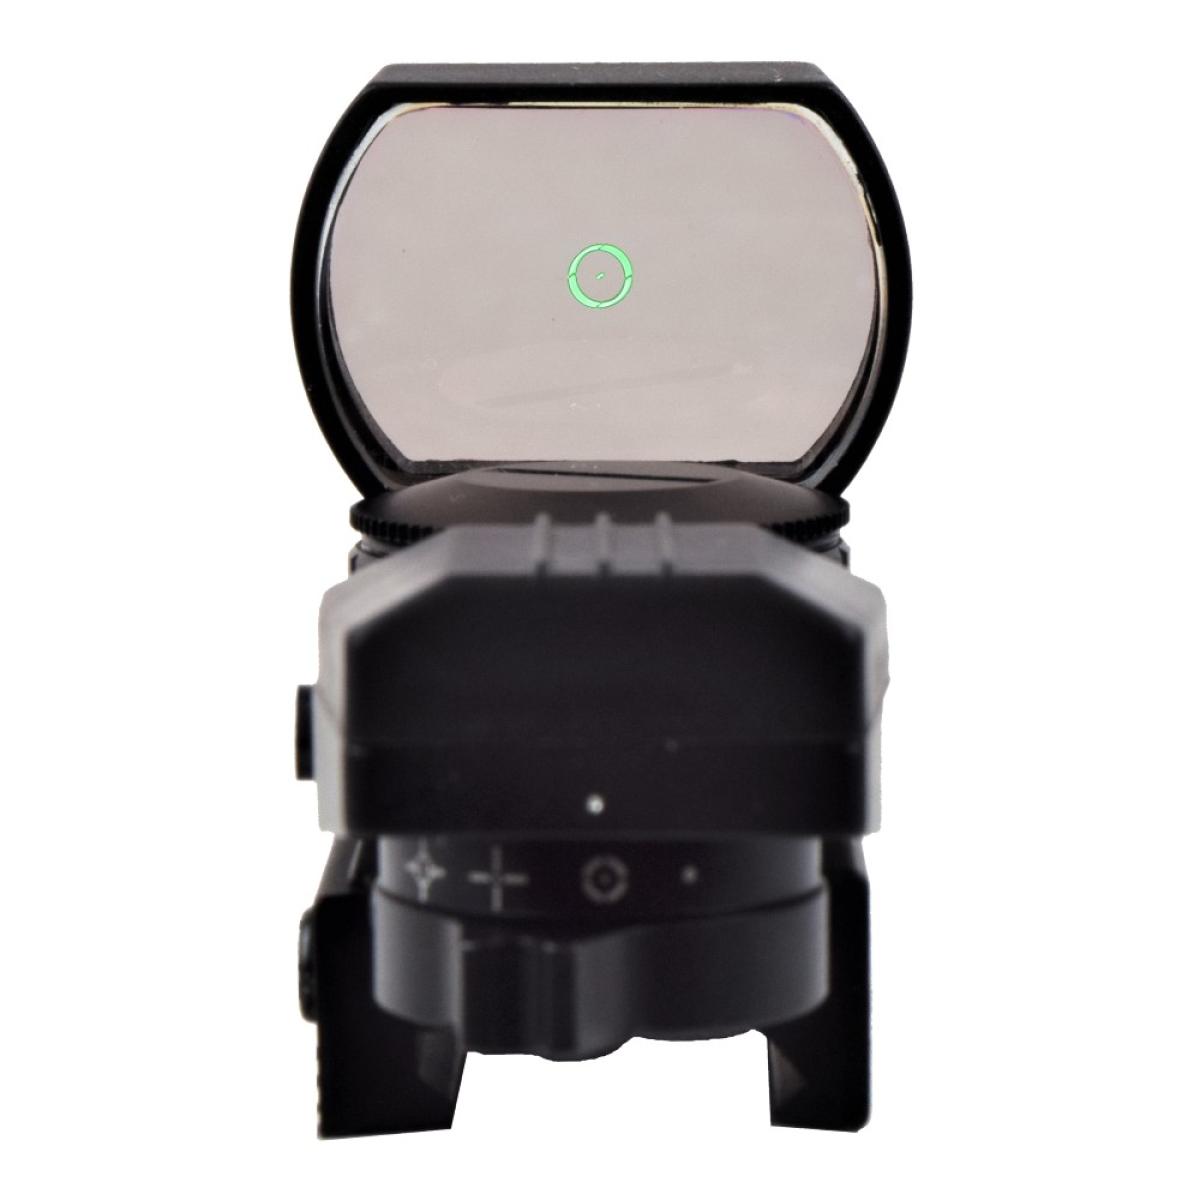 JS-TACTICAL RED DOT HOLOSIGHT BLACK